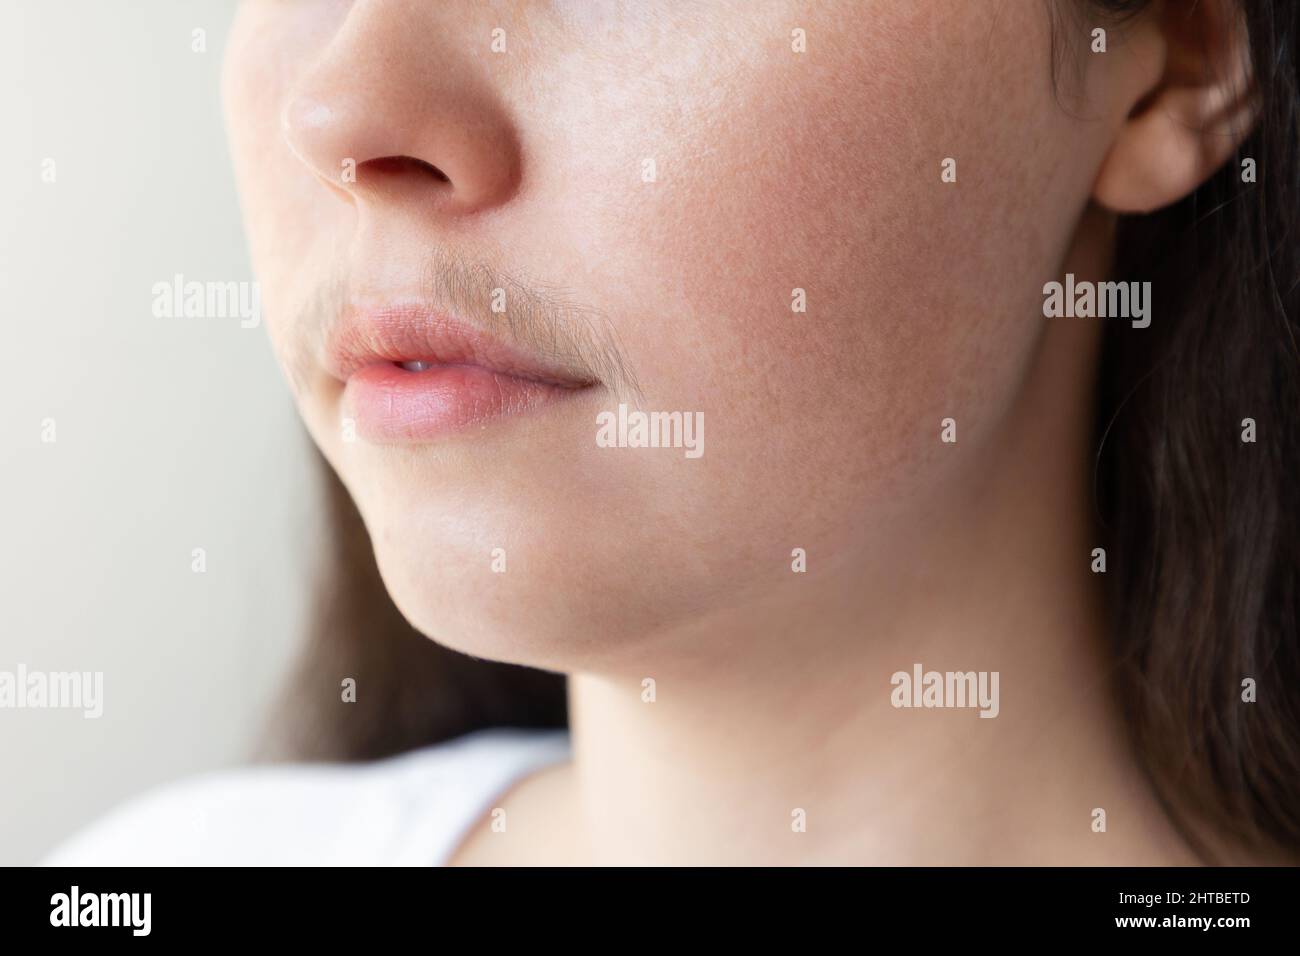 A close-up of a woman's face with a mustache over her upper lip. The concept of hair removal and epilation. Stock Photo